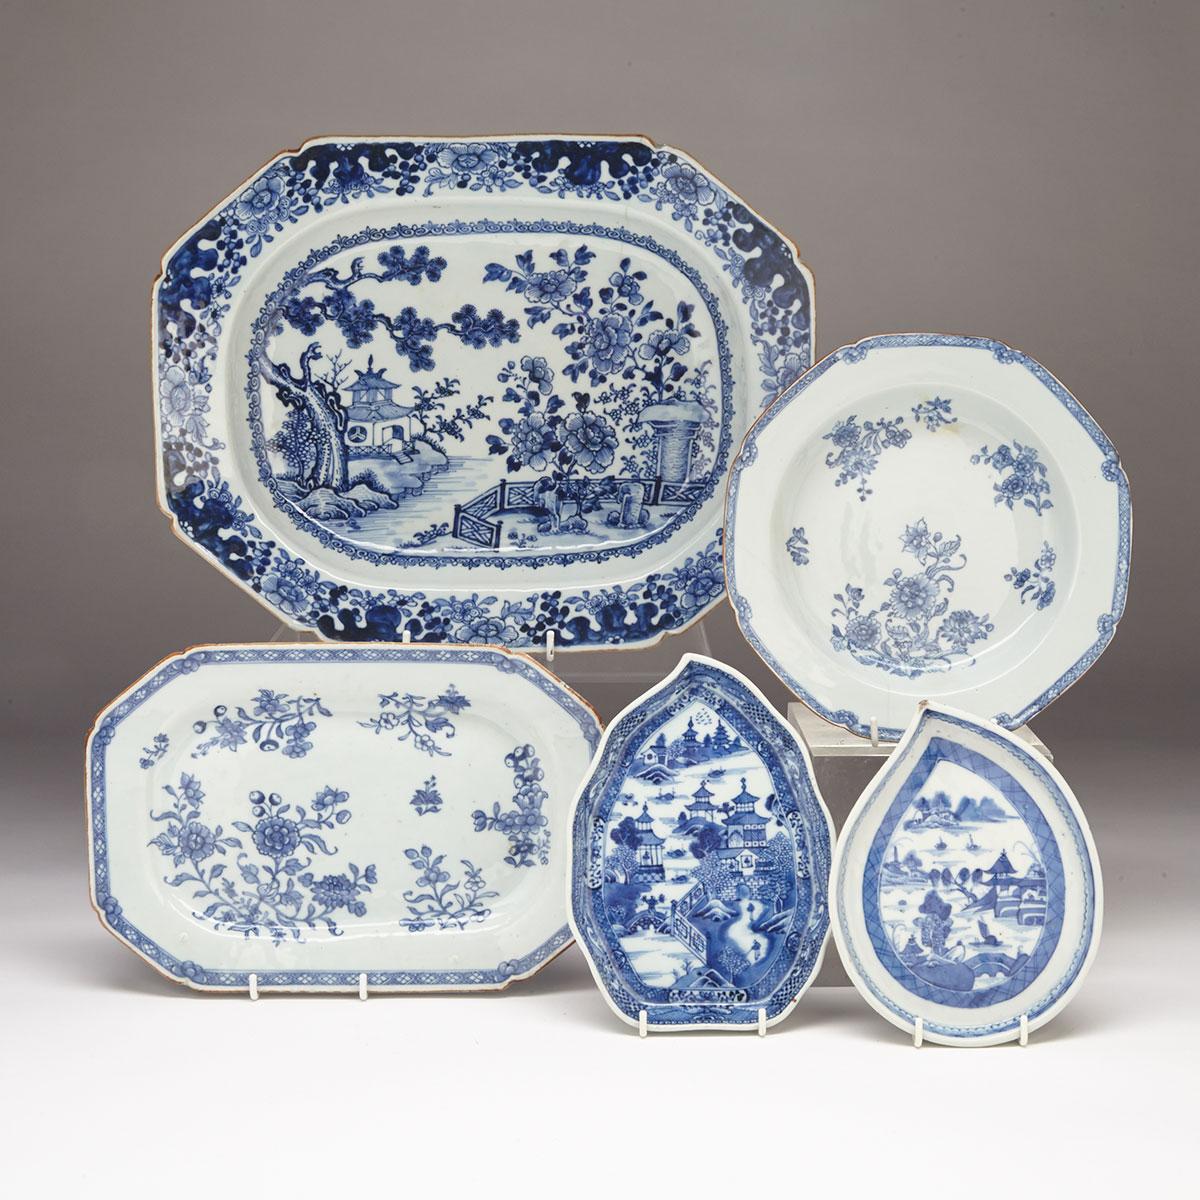 Five Export Blue and White Porcelain Wares, 18th/19th Century